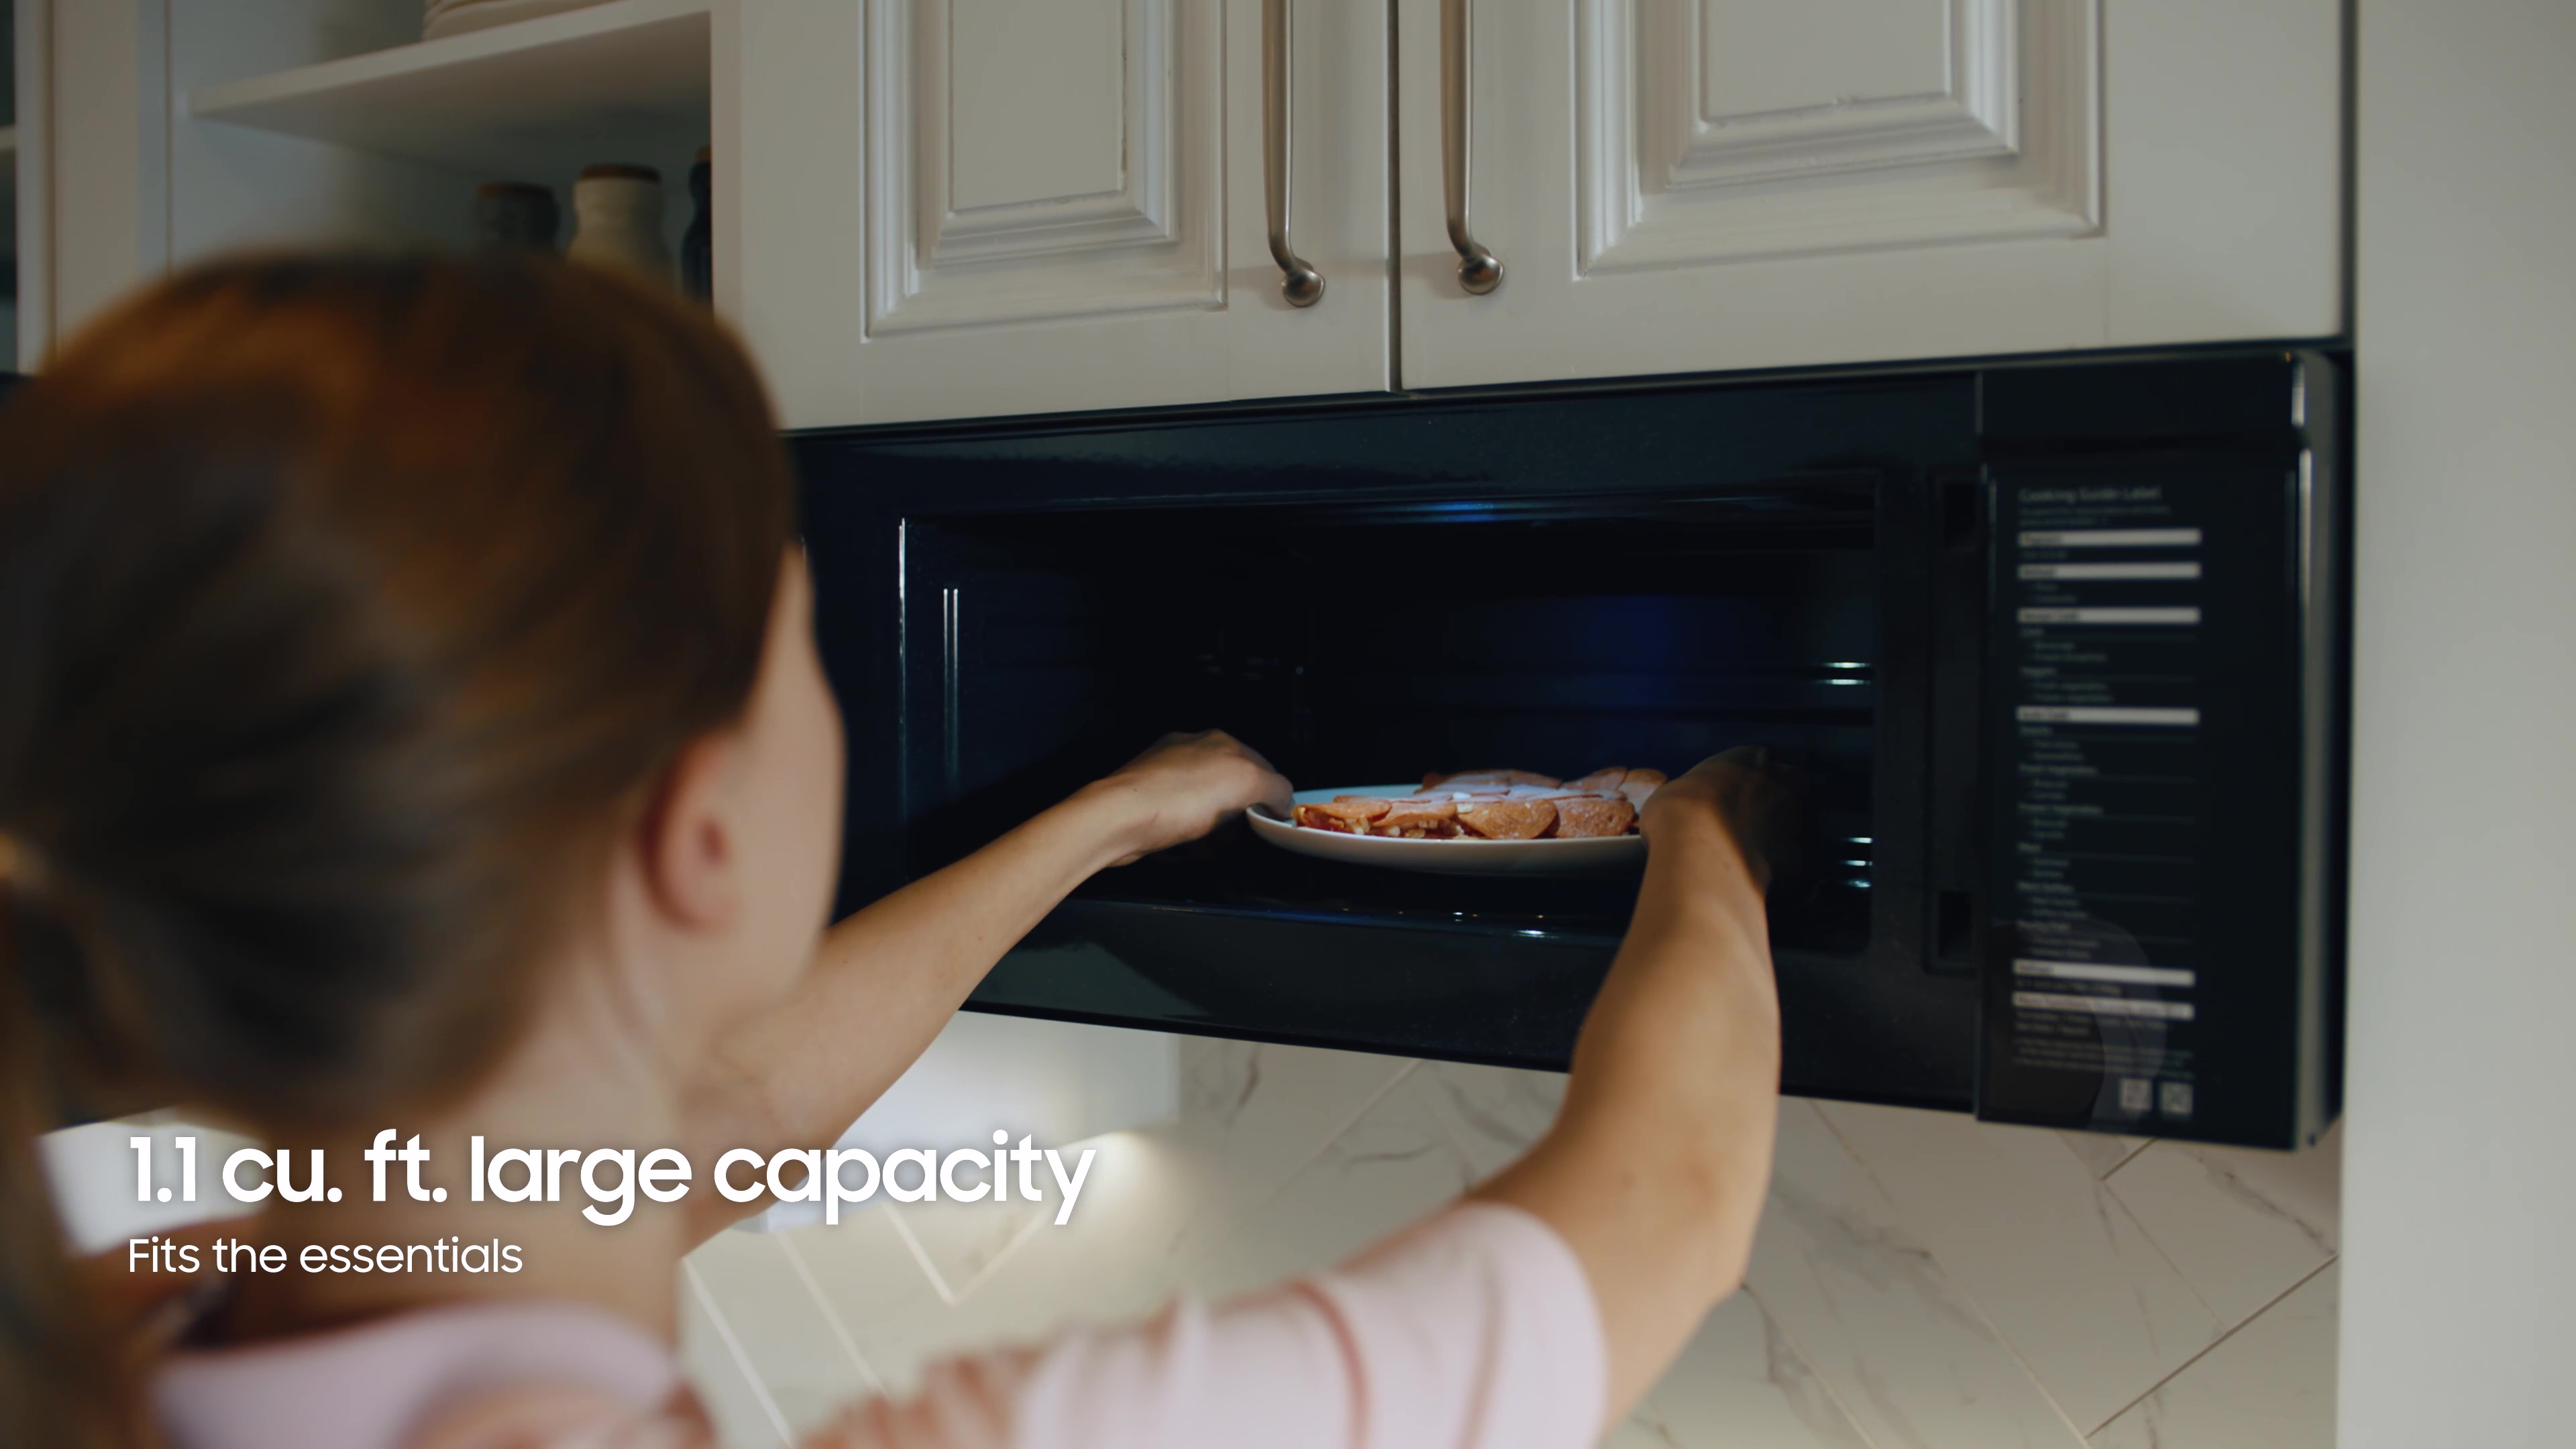 https://image-us.samsung.com/SamsungUS/home/home-appliances/microwaves/over-the-range/1142022/Fit-your-essentials-thumbnail.jpg?$feature-benefit-jpg$